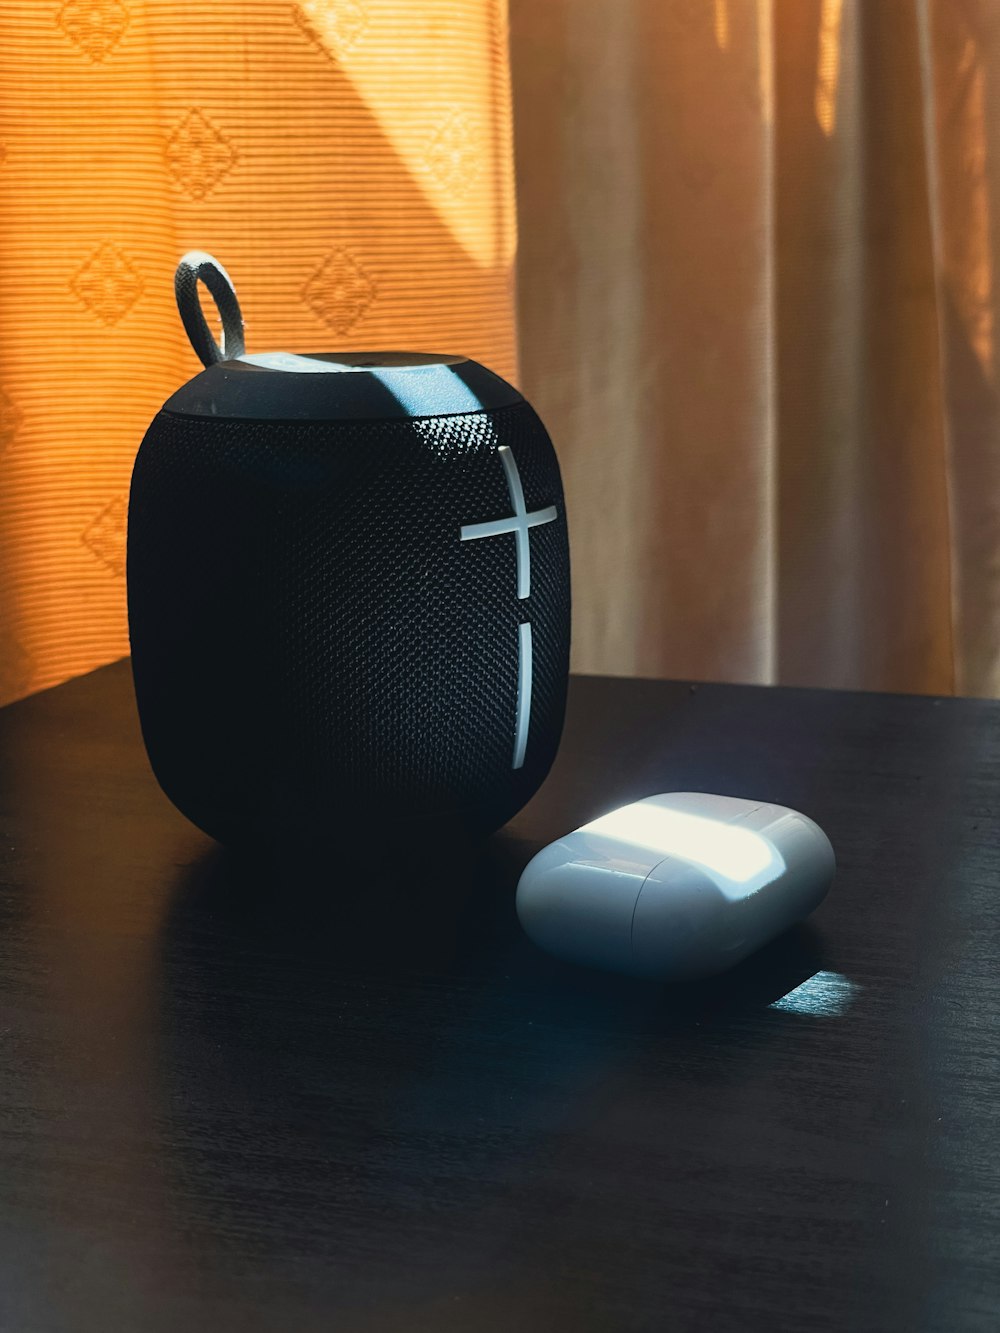 a black speaker and a white mouse on a table